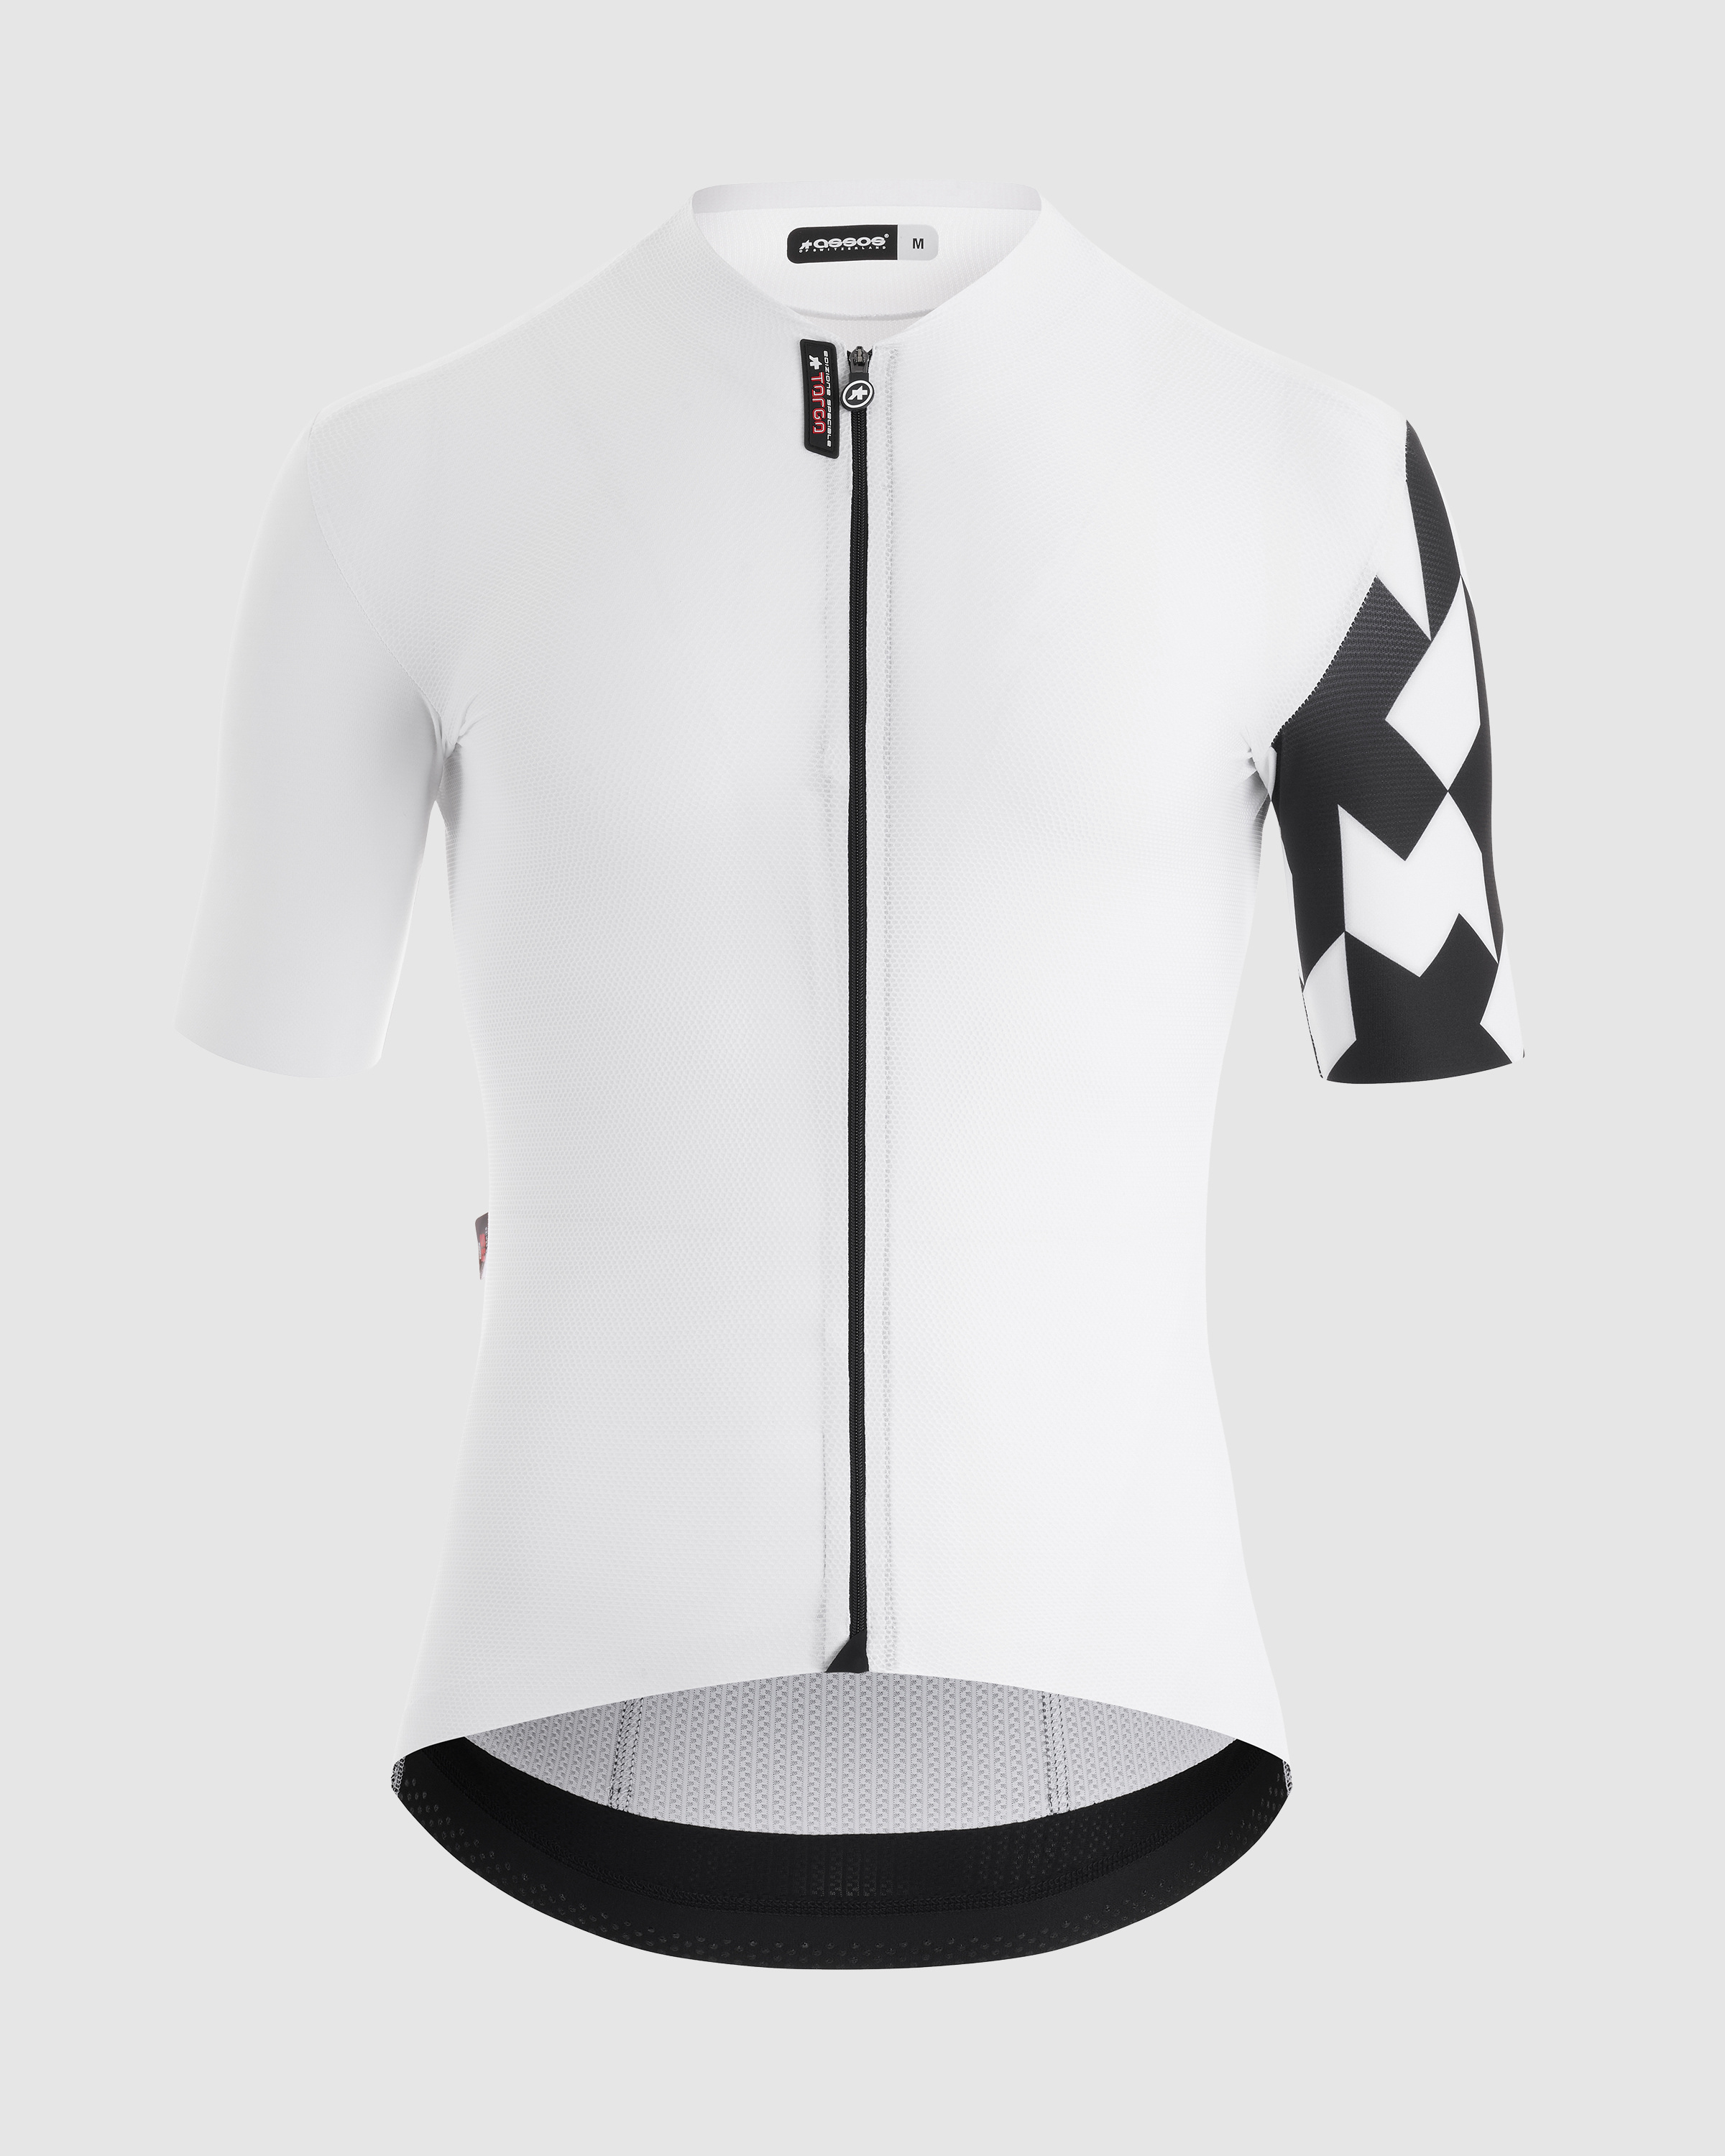 EQUIPE RS Jersey S9 TARGA - ASSOS Of Switzerland - Official Outlet